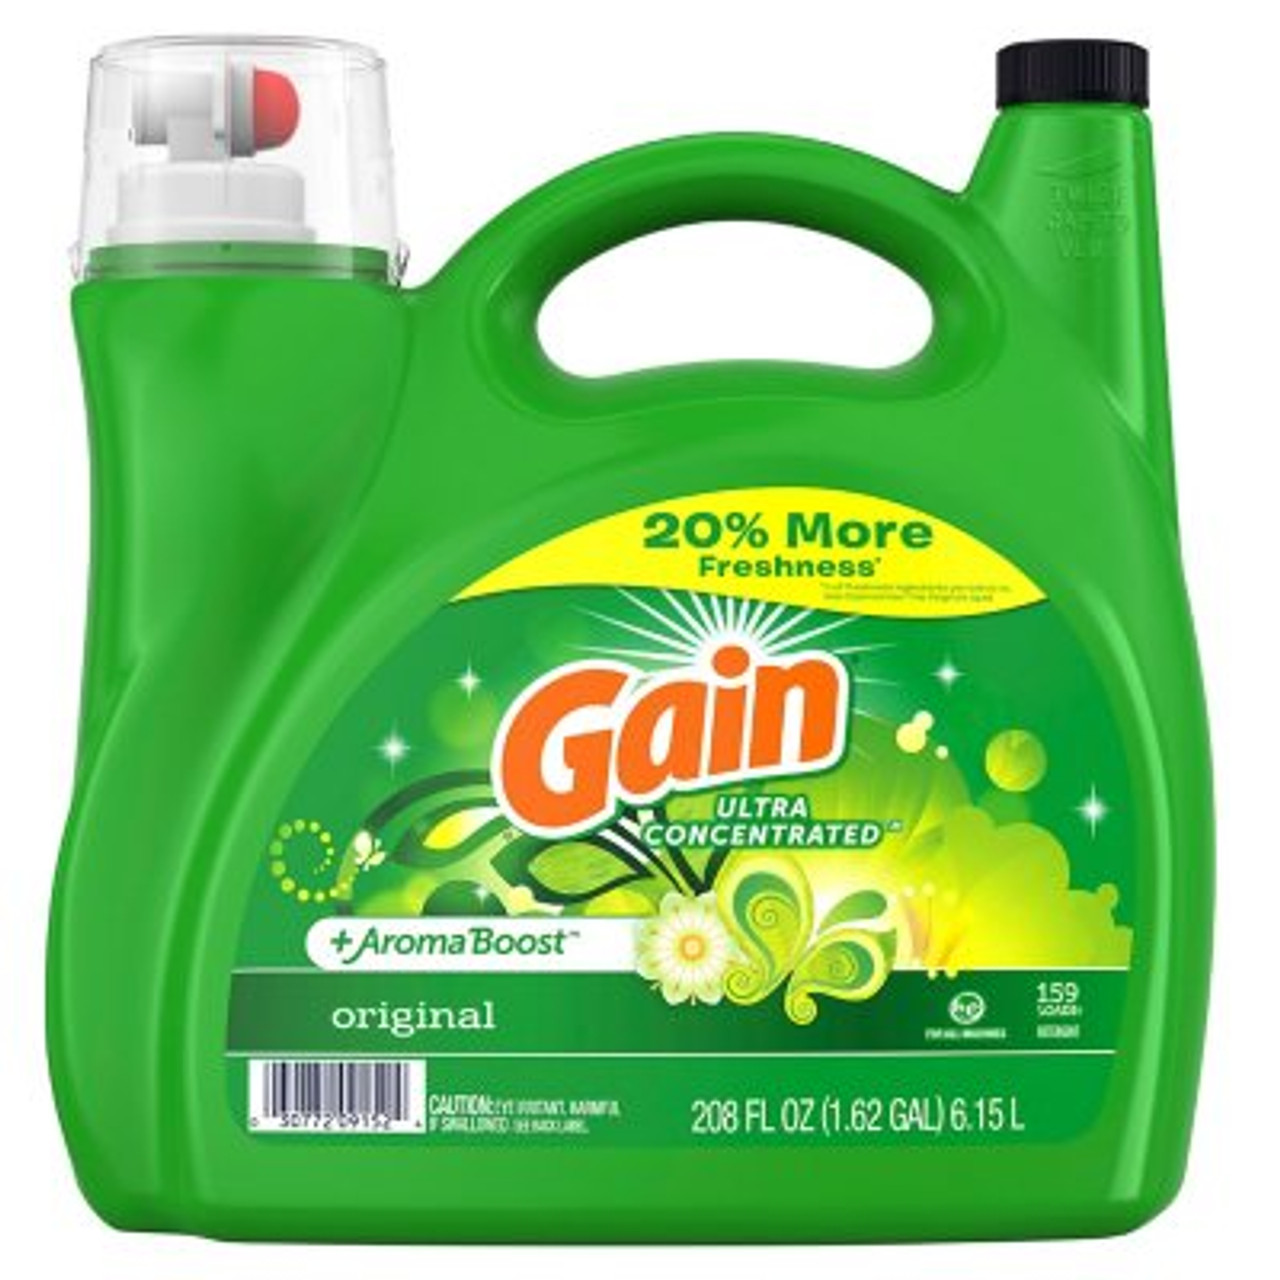 Gain Ultra Concentrated + Aroma Boost Laundry Detergent, Original Scent (208 fl. oz., 159 loads) - *In Store